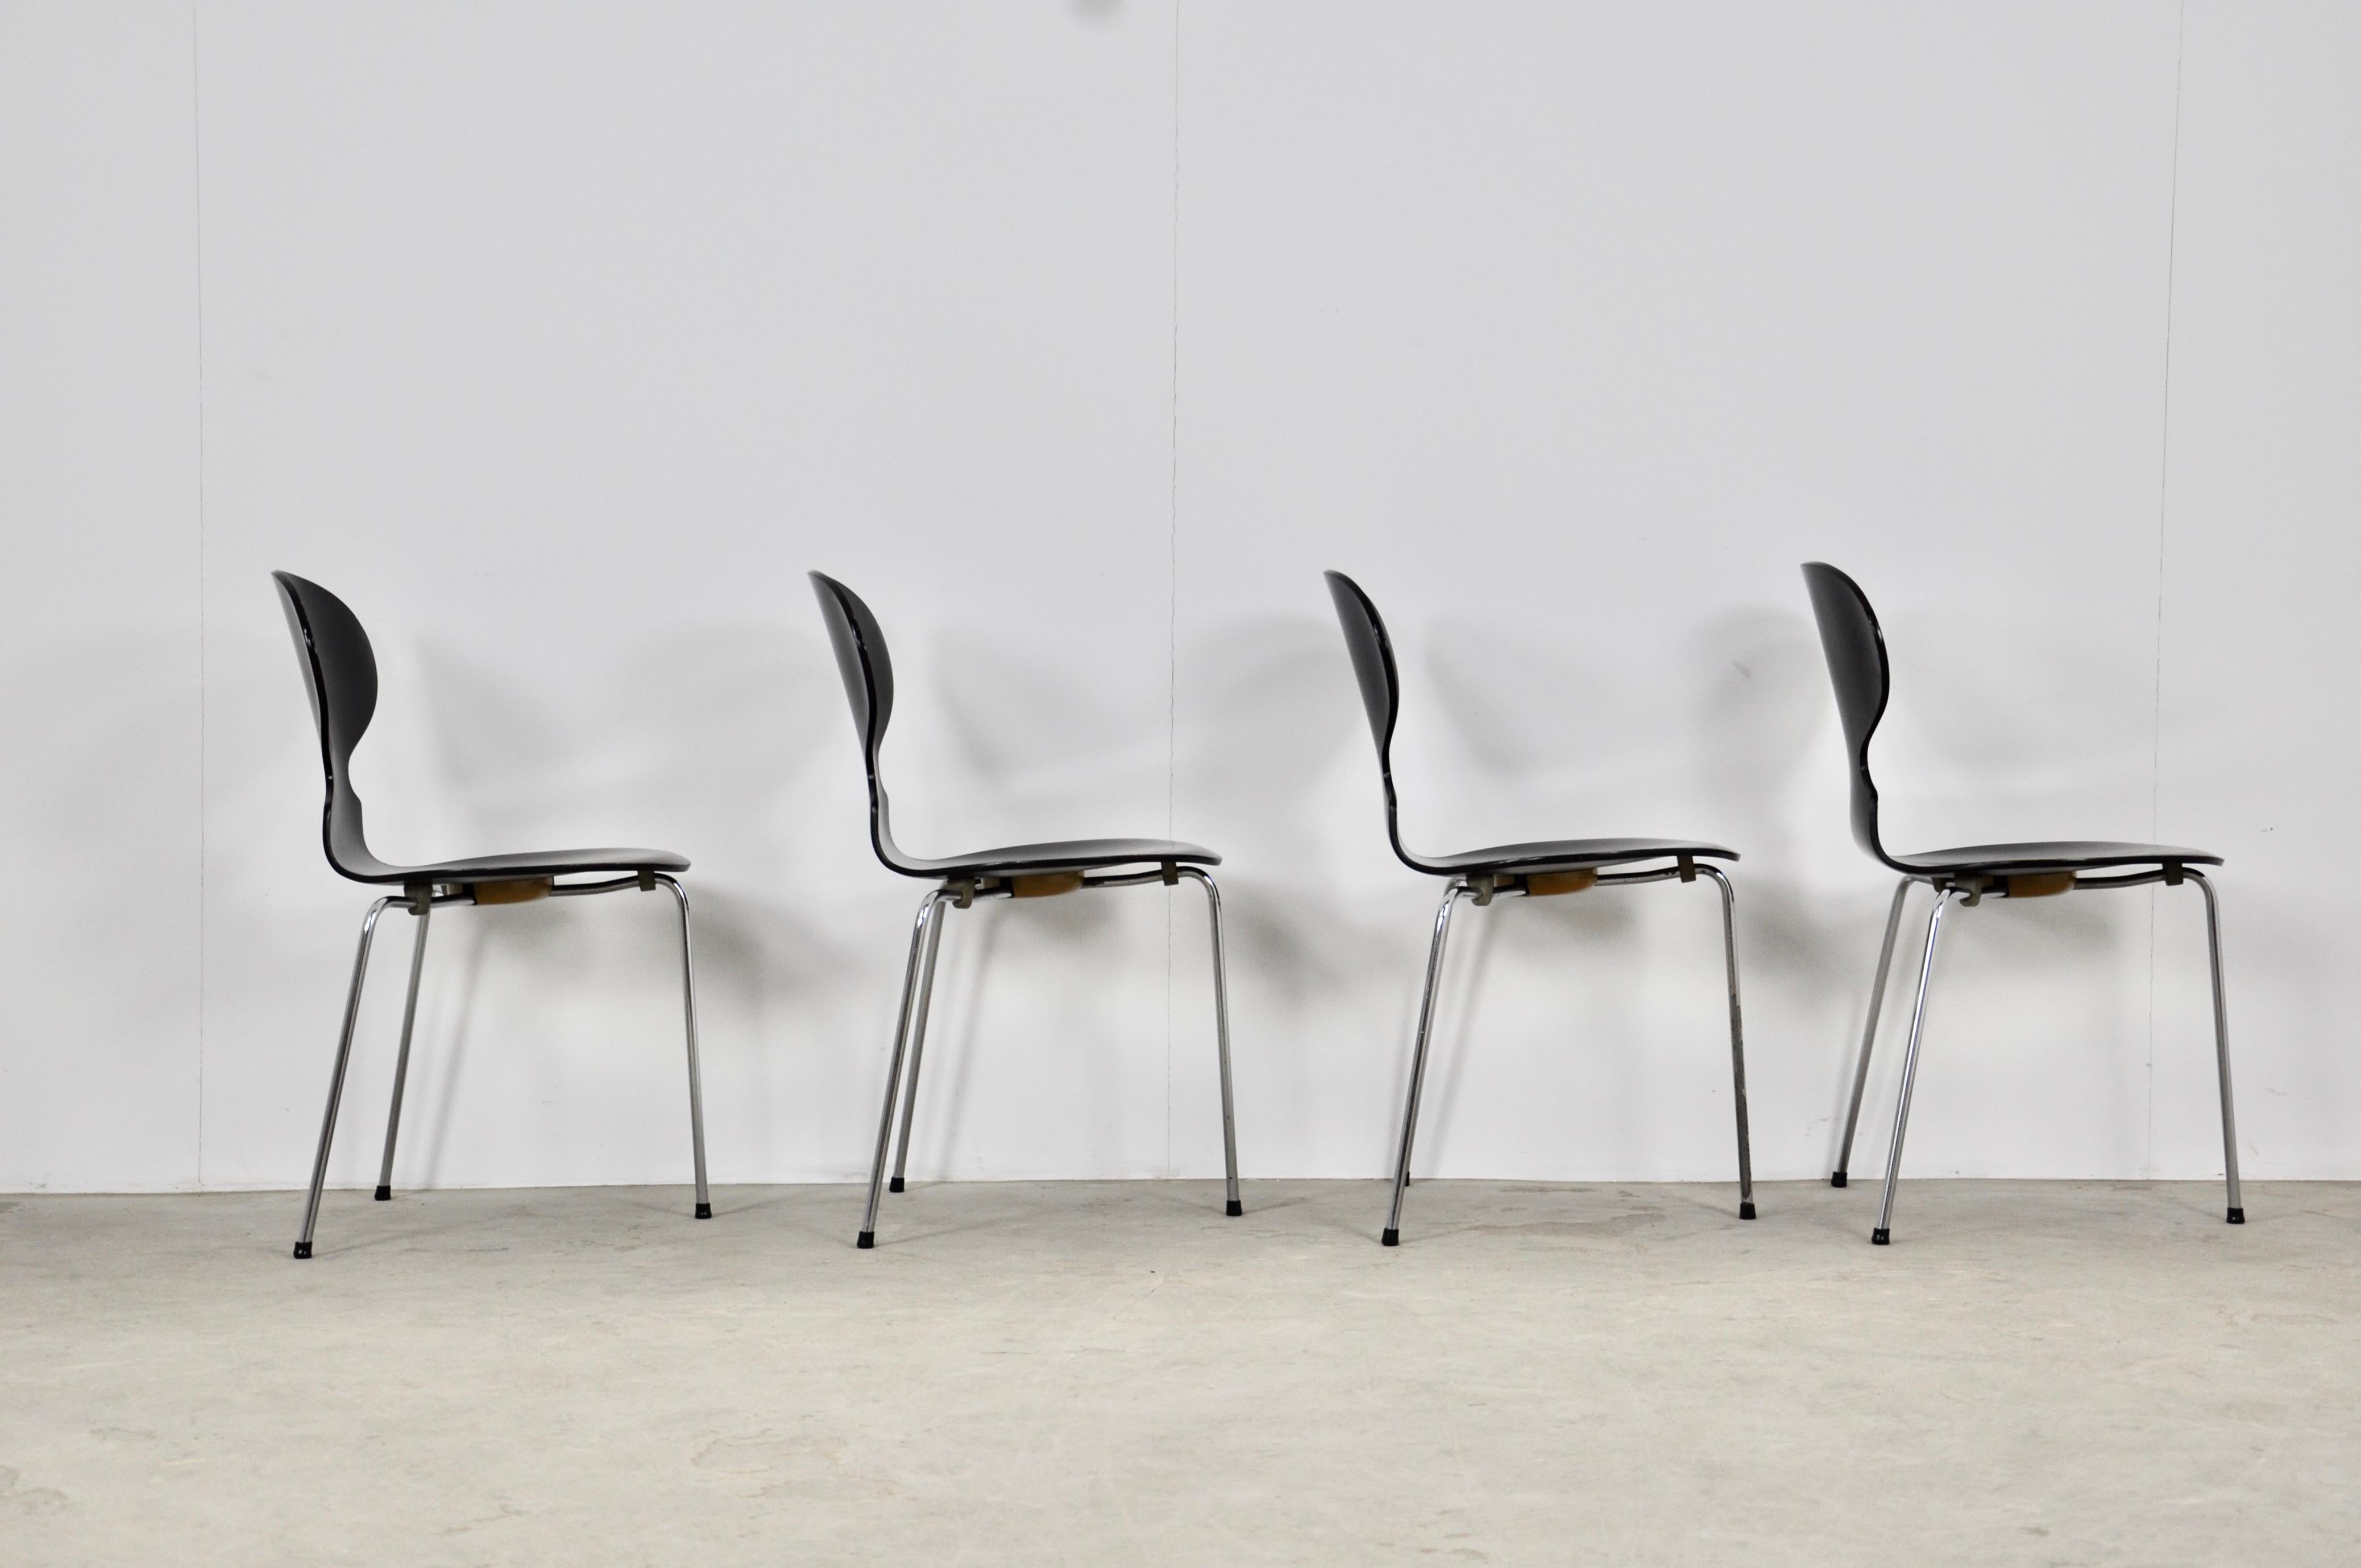 Set of 4 chairs in wood and metal in black color. Seat height: 43cm. Wear due to time and age of the chairs.